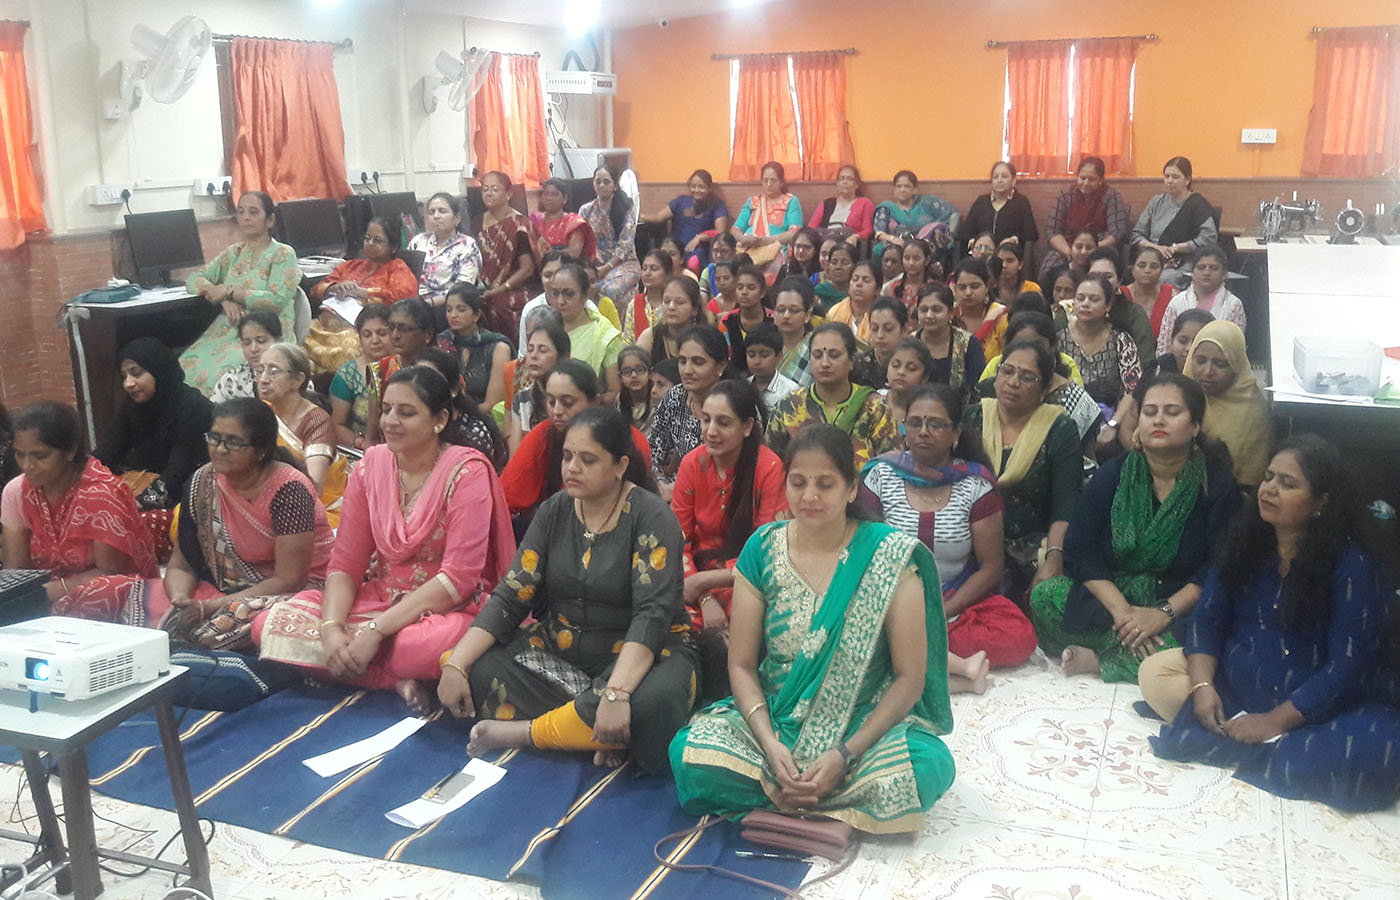 All beneficiaries in a meditation during the Tej gyaan Foundation. See the serene look on all the faces